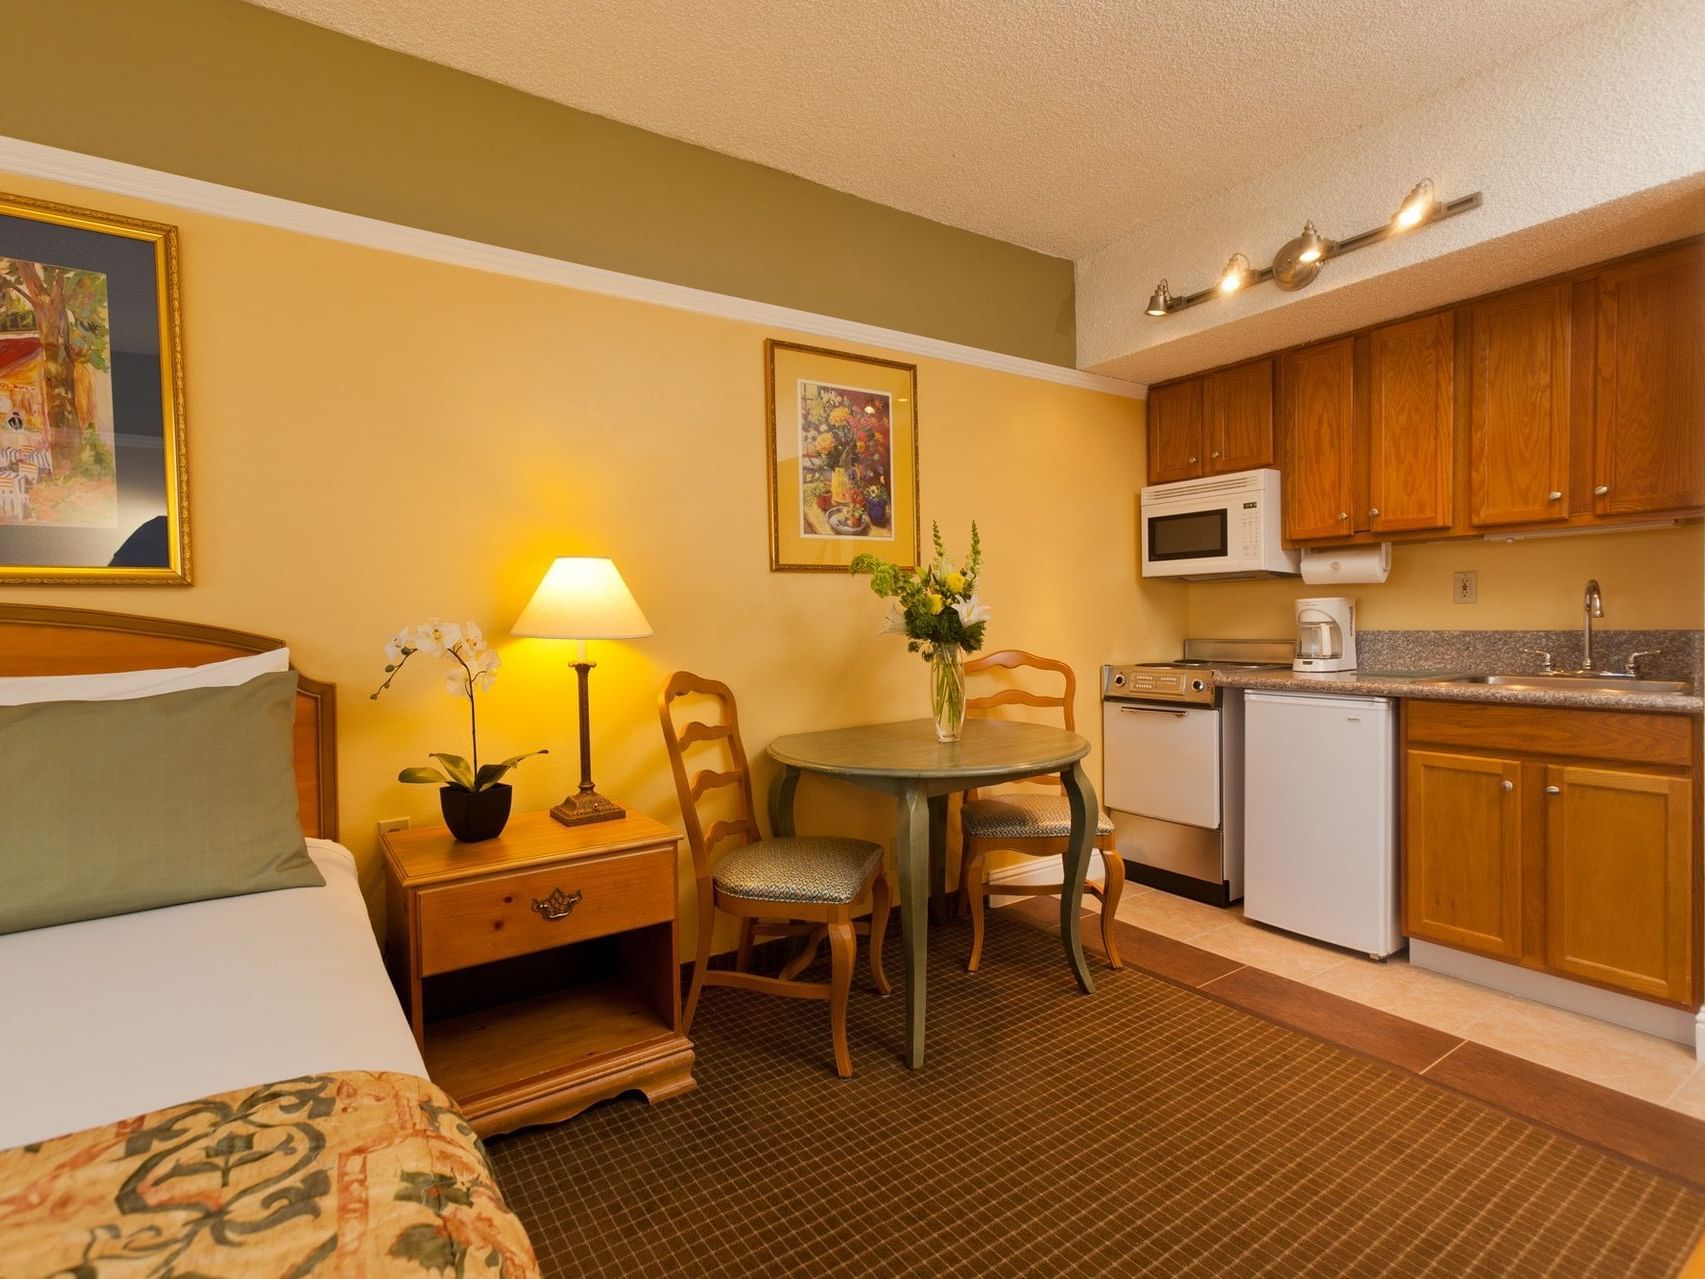 Standard Studio type suite at Legacy Vacation Resorts